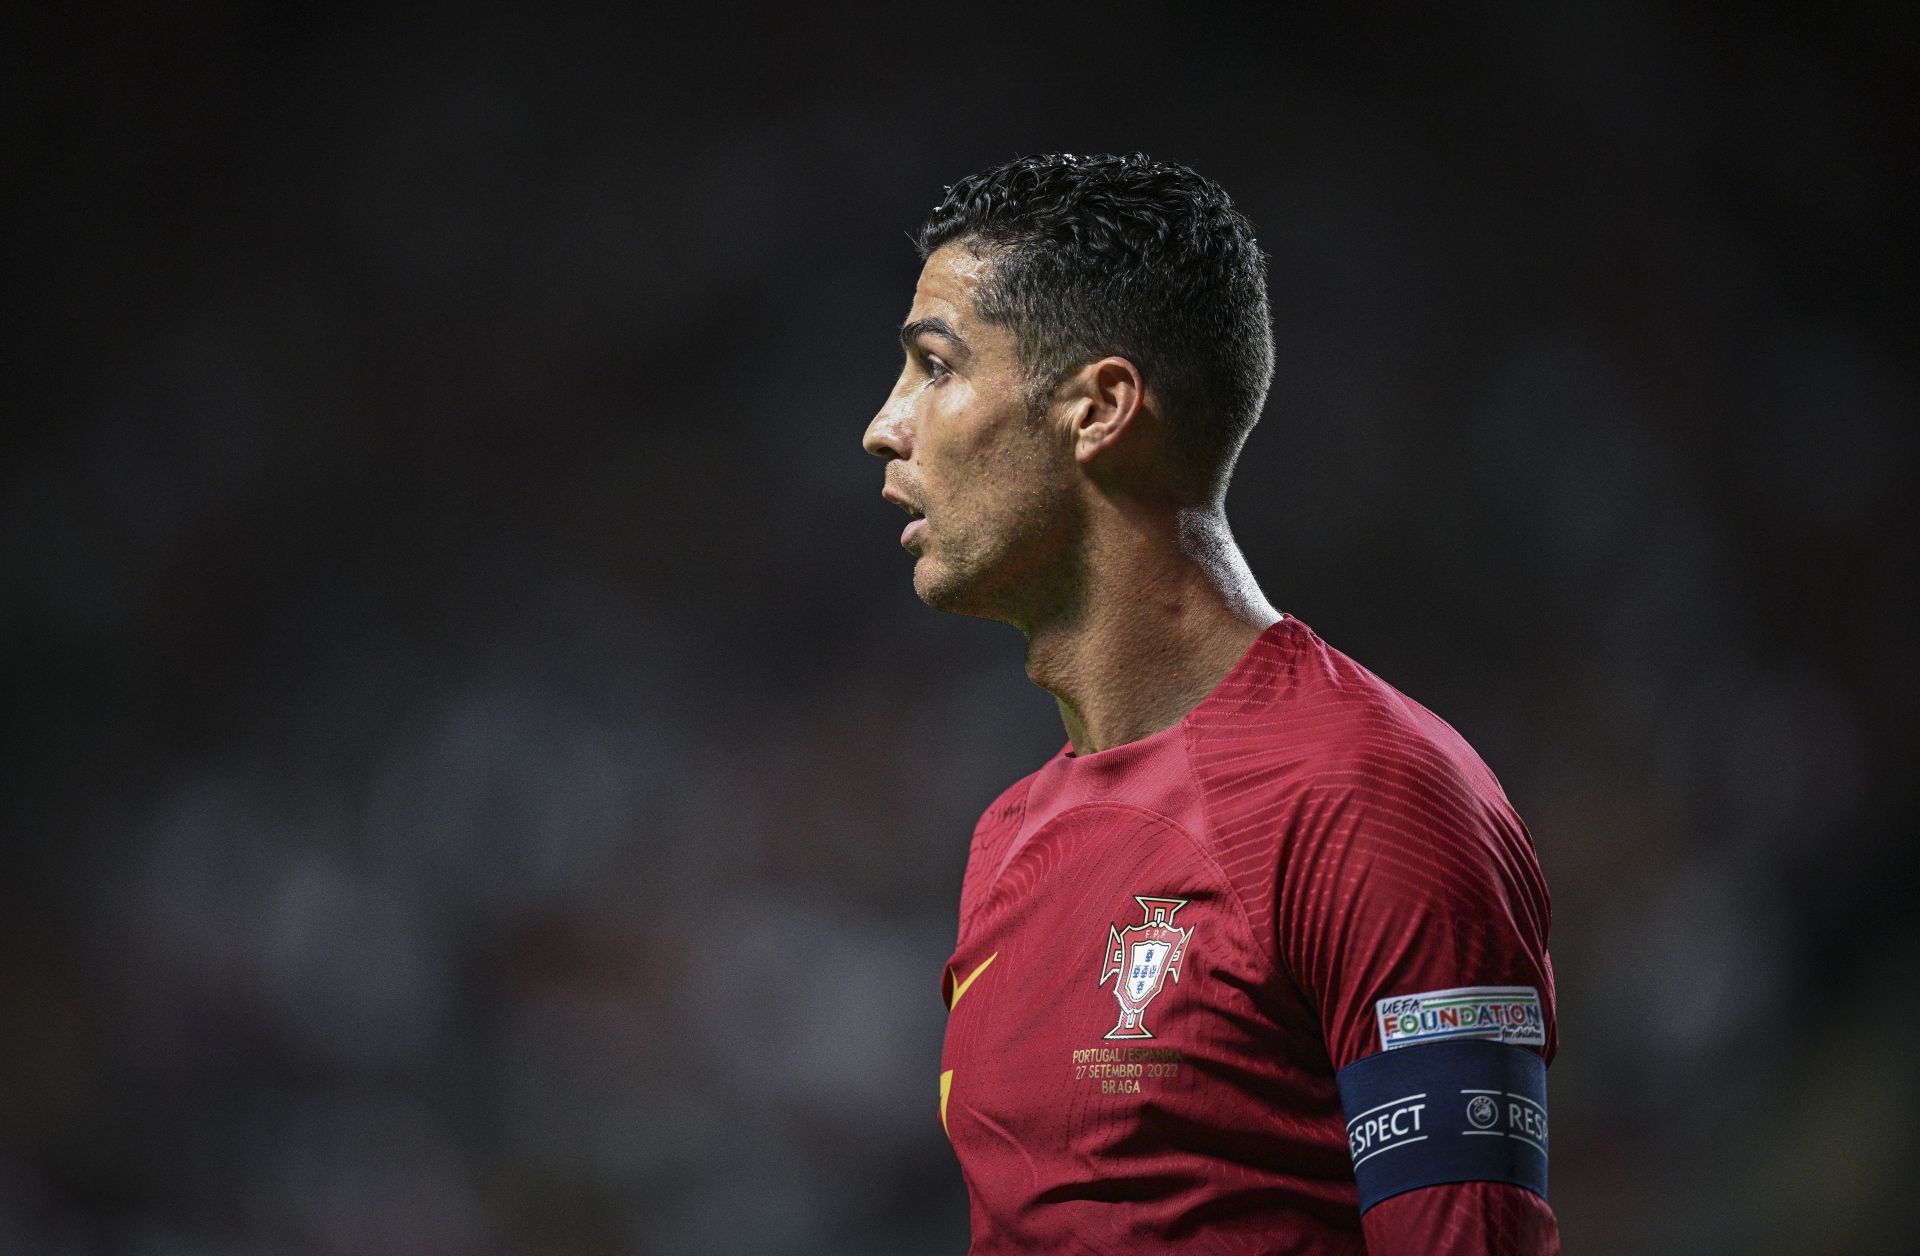 Ronaldo will play his fifth FIFA World Cup with Portugal